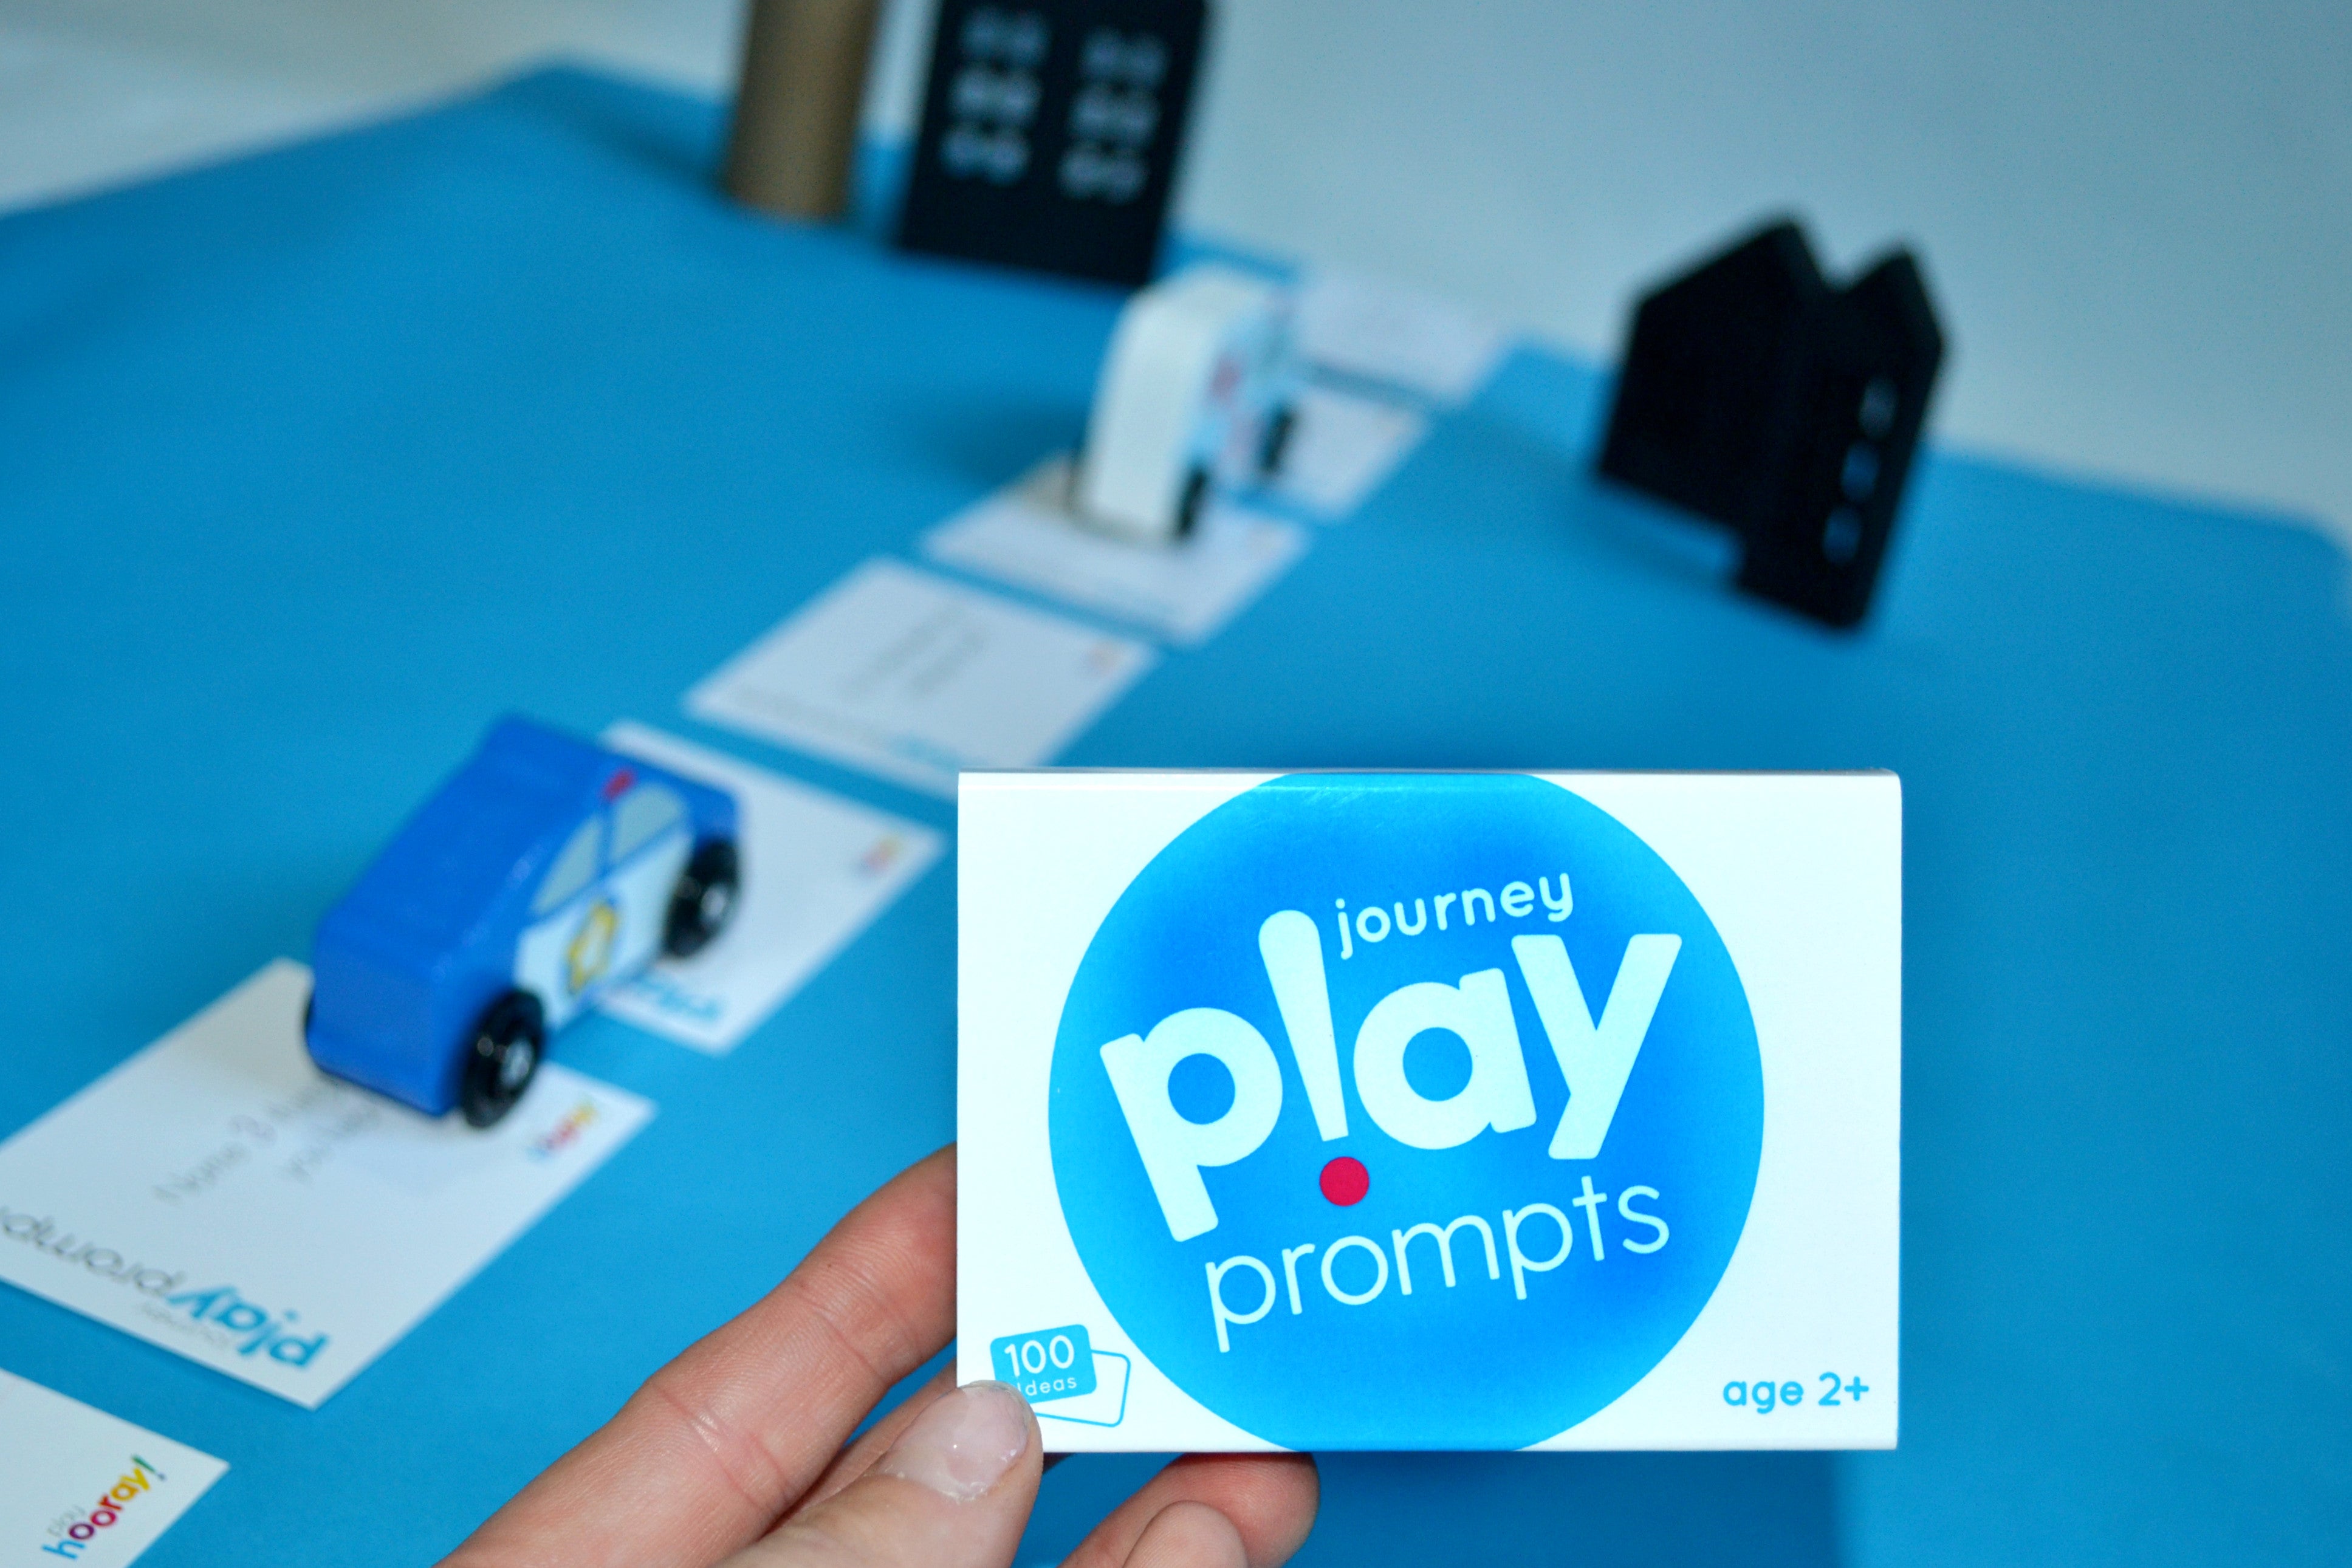 journey playPROMPTS printable activity cards for kids aged 3+